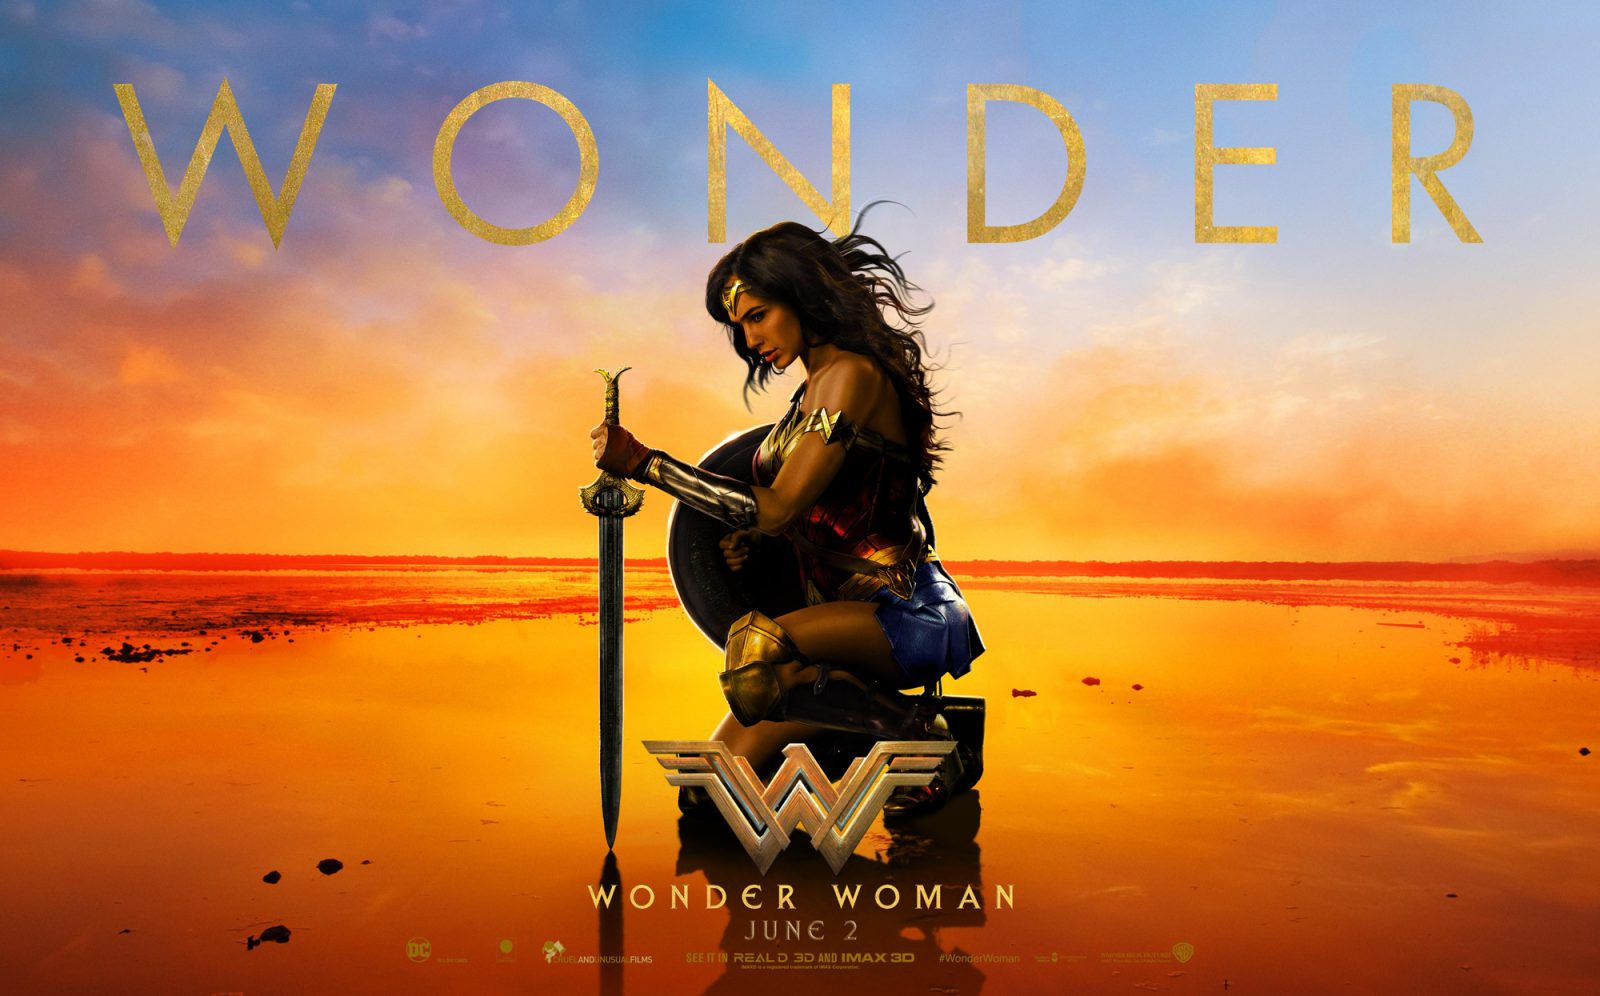 ‘wonder woman’ breaks box office and stereotypes